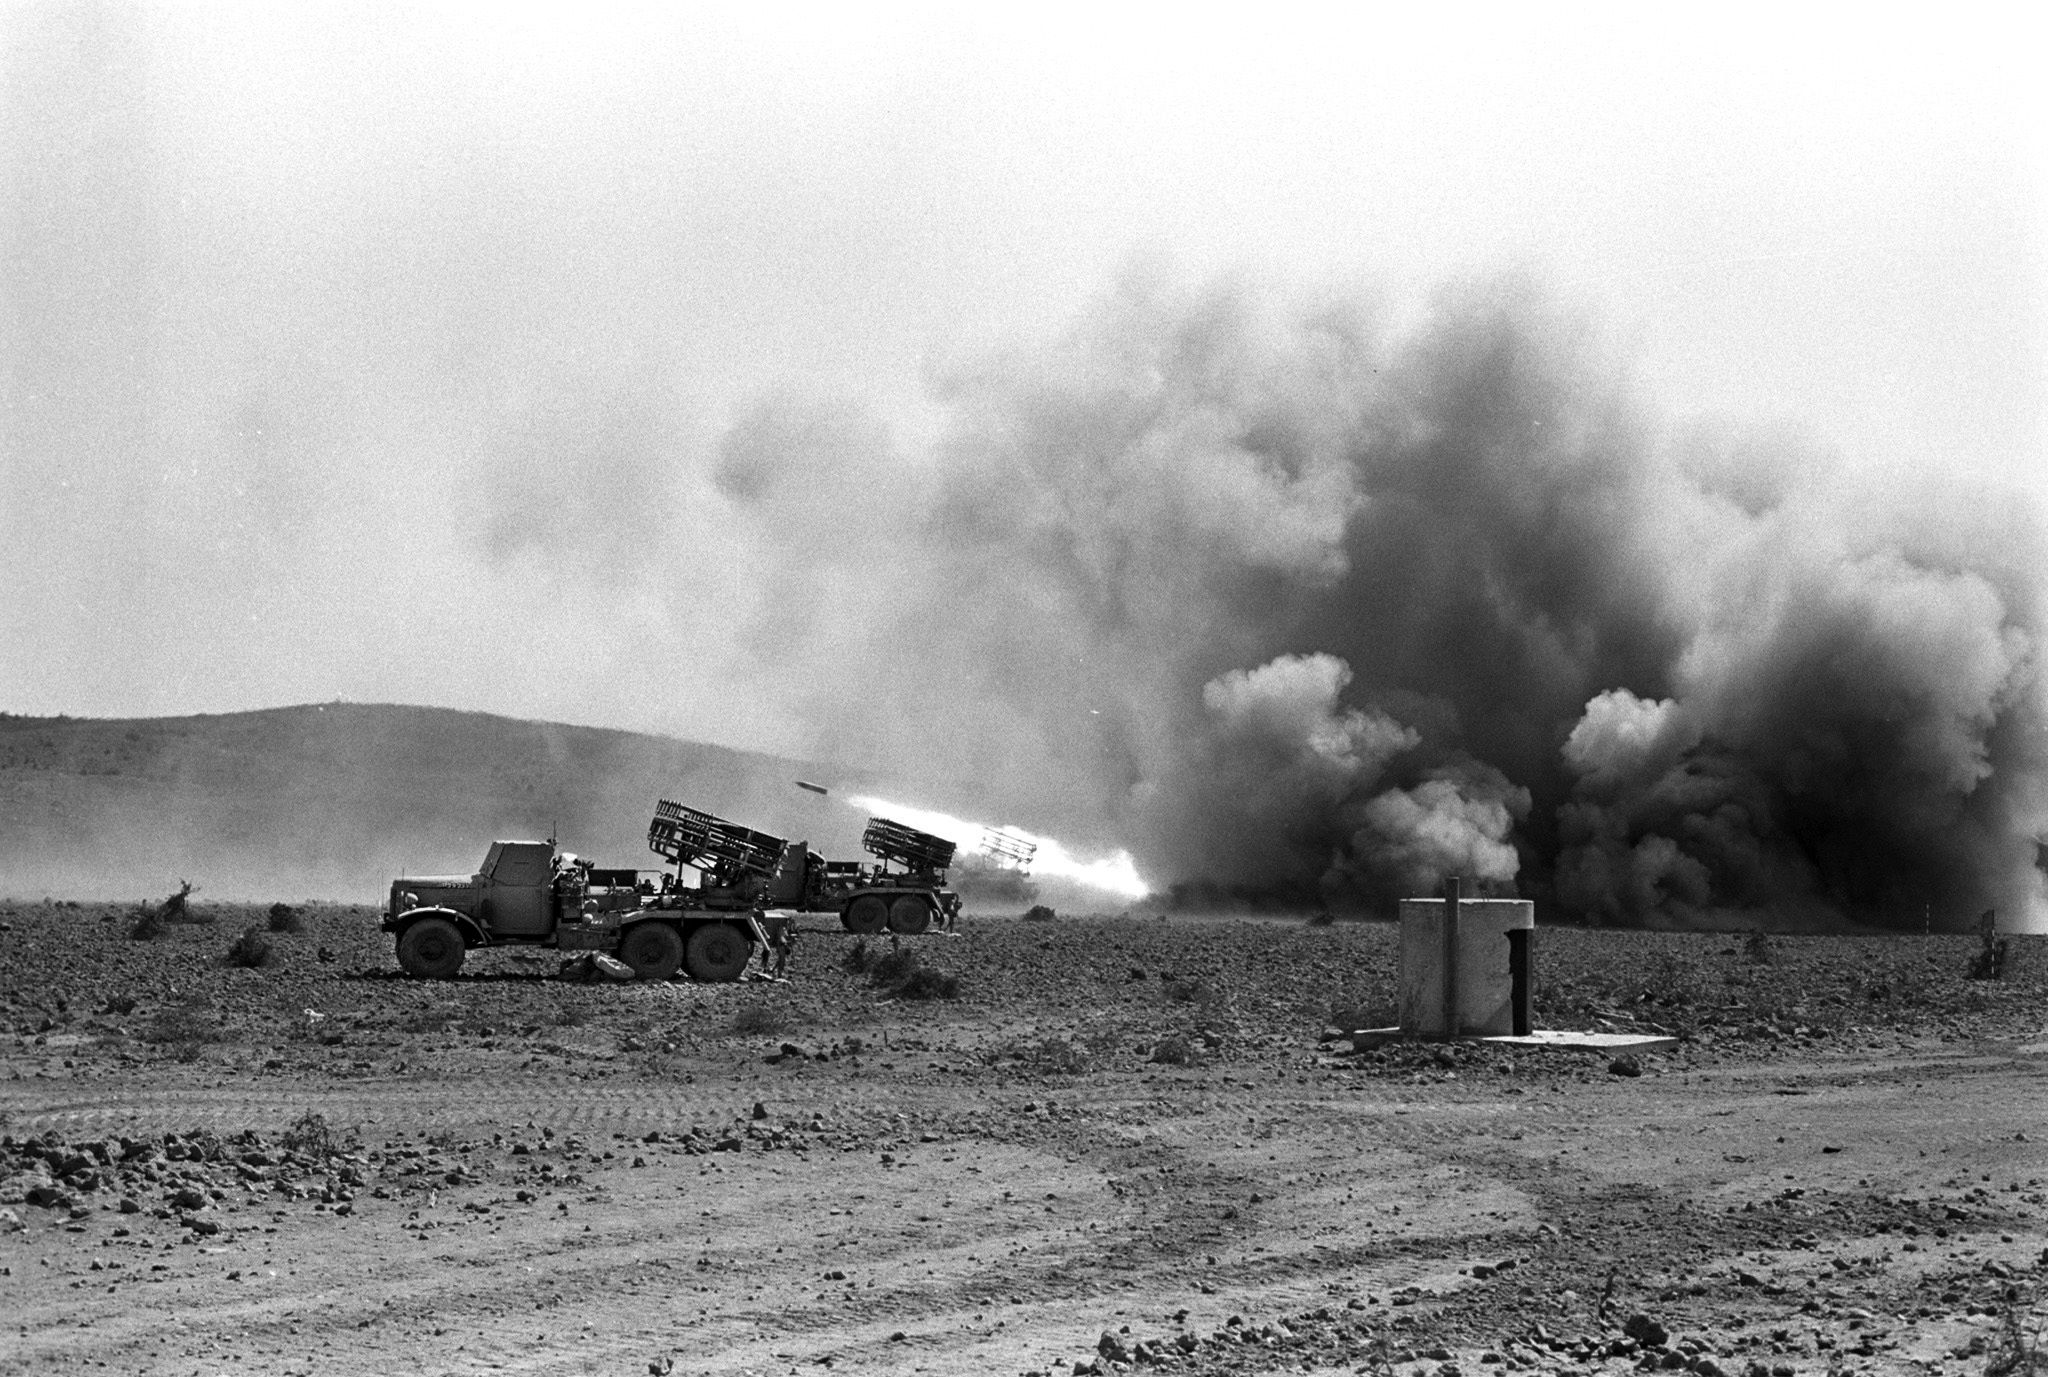 The Israel Defense Forces fire Soviet Katusha rocket launchers (BM-24 MRLs) from World War II. Captured during the Six-Day War (1967),  they were used by two battalions during the Yom Kippur War, as well as the 1982 Lebanon War.